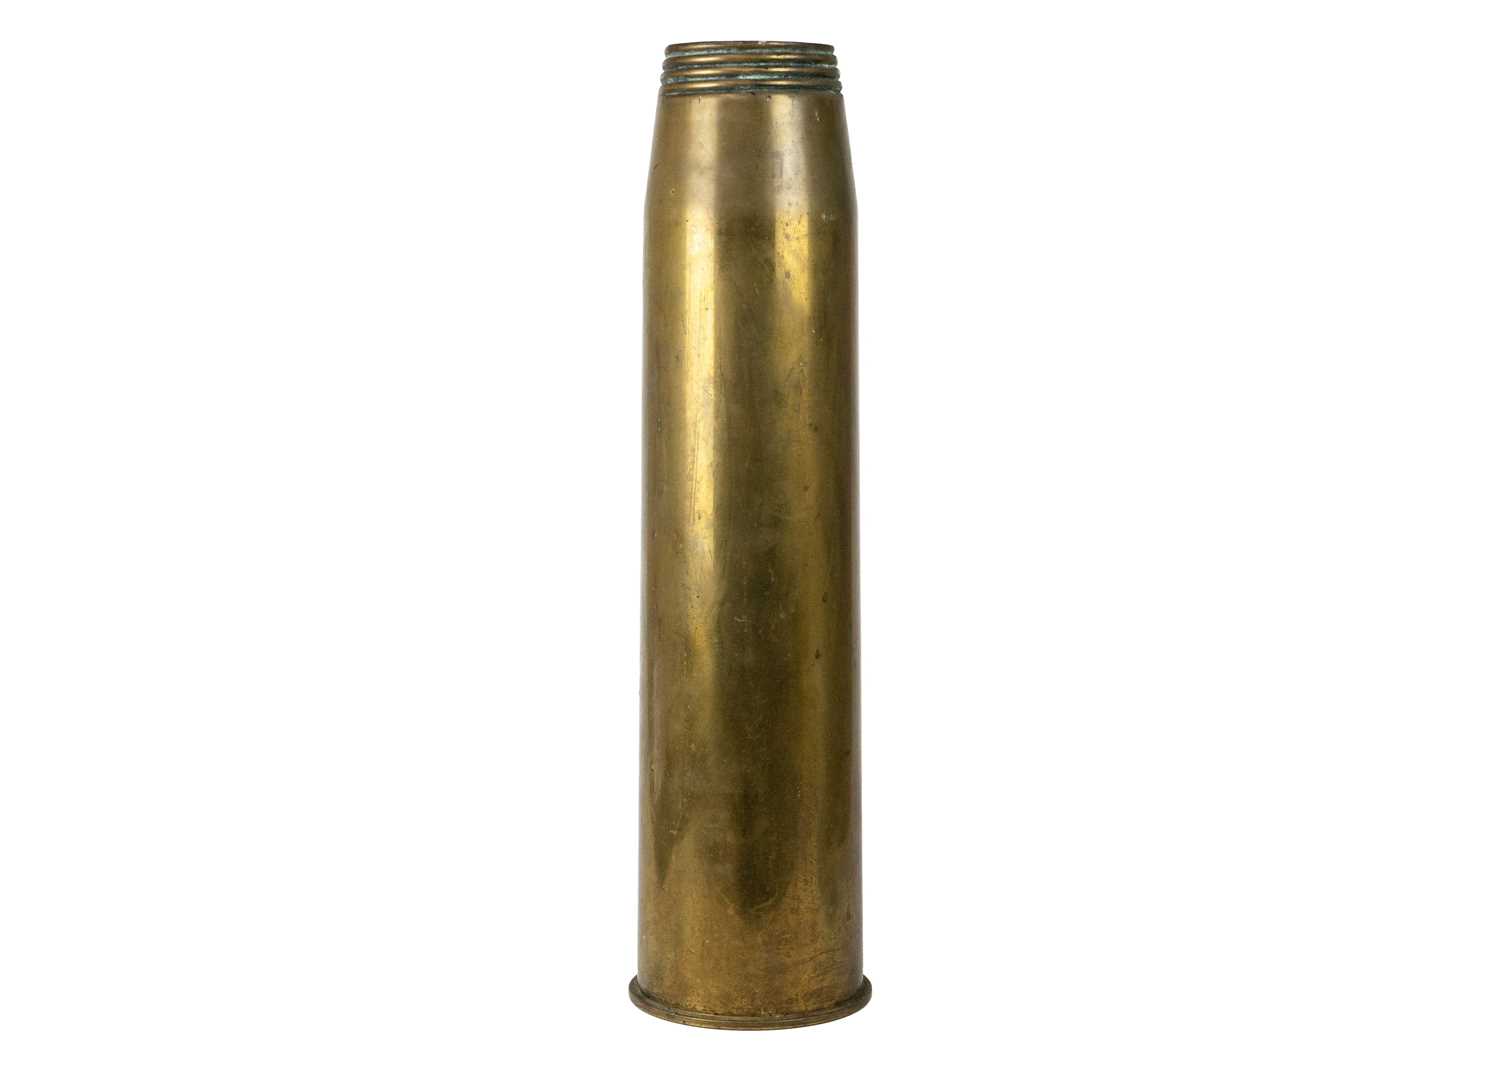 A 4.5 inch large brass naval shell case.